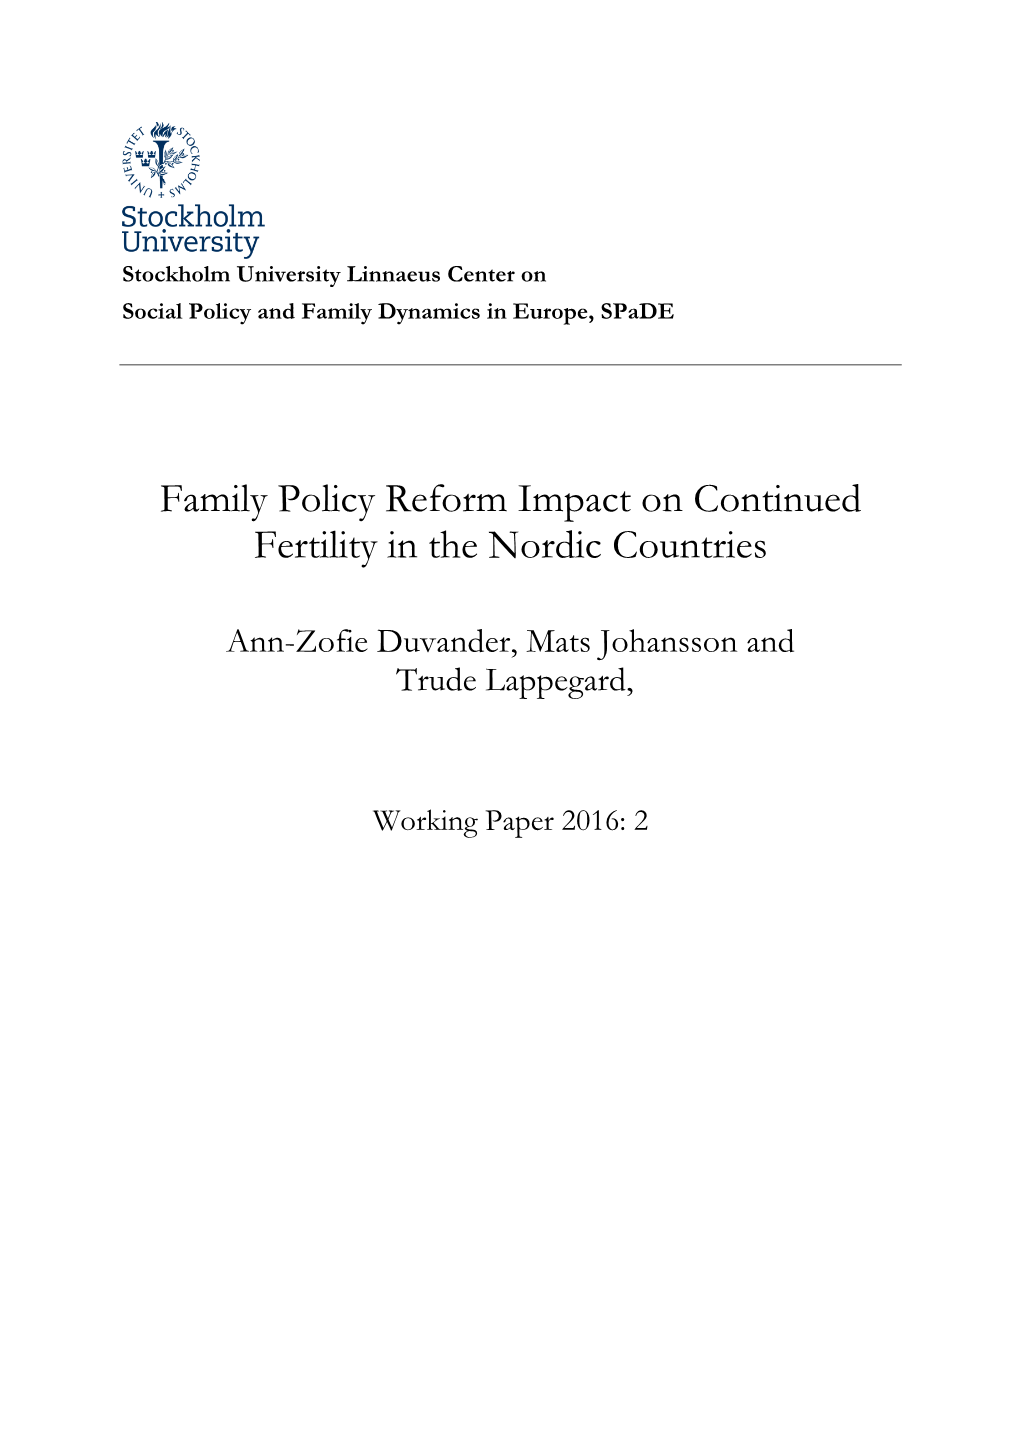 Family Policy Reform Impact on Continued Fertility in the Nordic Countries